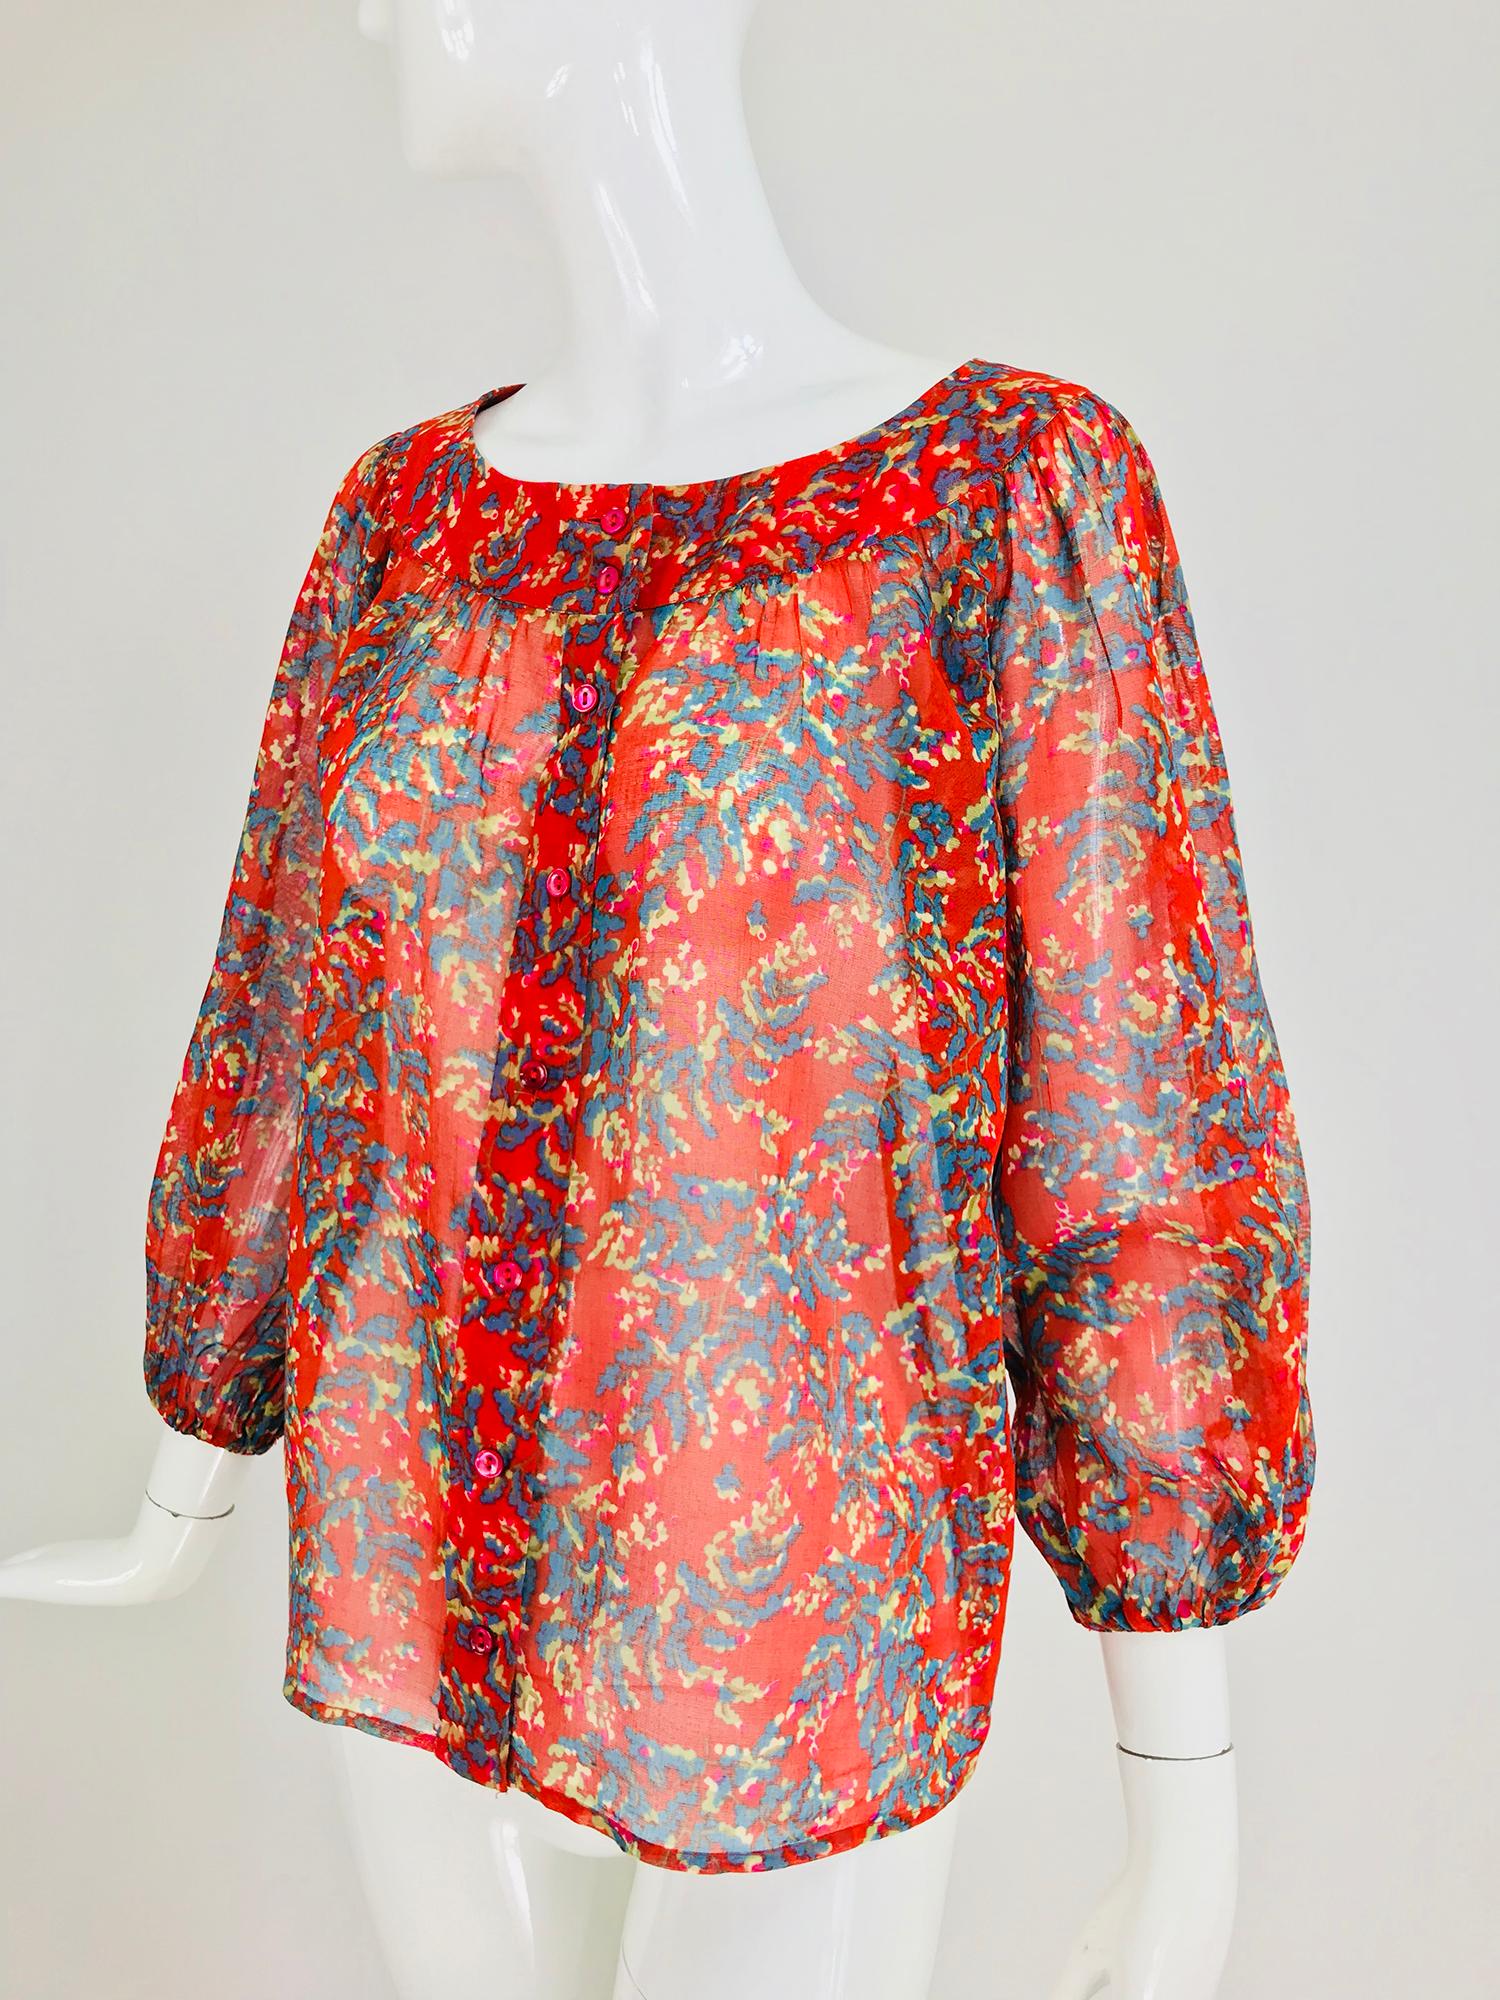 Yves Saint Laurent sheer floral cotton blouse from the 1970s. Peasant style blouse of sheer cotton voile, the banded neckline has light gathering with a full body, 3/4 length full raglan sleeves with cased elastic cuffs. The blouse closes at the